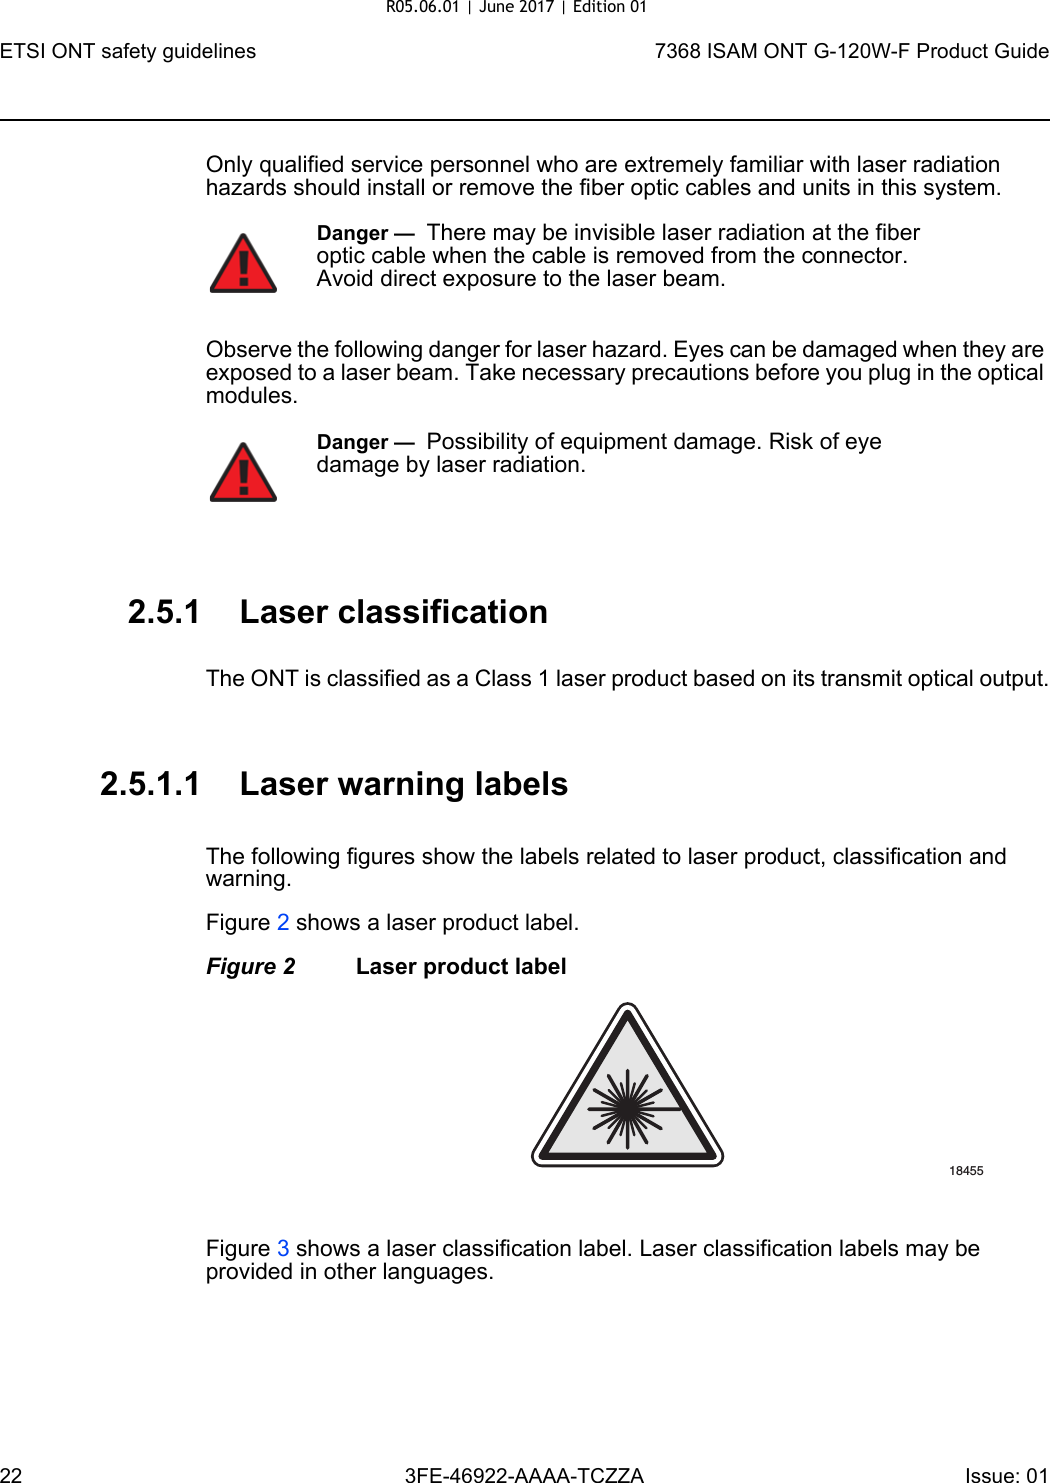 ETSI ONT safety guidelines227368 ISAM ONT G-120W-F Product Guide3FE-46922-AAAA-TCZZA Issue: 01 Only qualified service personnel who are extremely familiar with laser radiation hazards should install or remove the fiber optic cables and units in this system.Observe the following danger for laser hazard. Eyes can be damaged when they are exposed to a laser beam. Take necessary precautions before you plug in the optical modules.2.5.1 Laser classificationThe ONT is classified as a Class 1 laser product based on its transmit optical output.2.5.1.1 Laser warning labelsThe following figures show the labels related to laser product, classification and warning. Figure 2 shows a laser product label.Figure 2 Laser product labelFigure 3 shows a laser classification label. Laser classification labels may be provided in other languages.Danger —  There may be invisible laser radiation at the fiber optic cable when the cable is removed from the connector. Avoid direct exposure to the laser beam.Danger —  Possibility of equipment damage. Risk of eye damage by laser radiation.18455R05.06.01 | June 2017 | Edition 01 